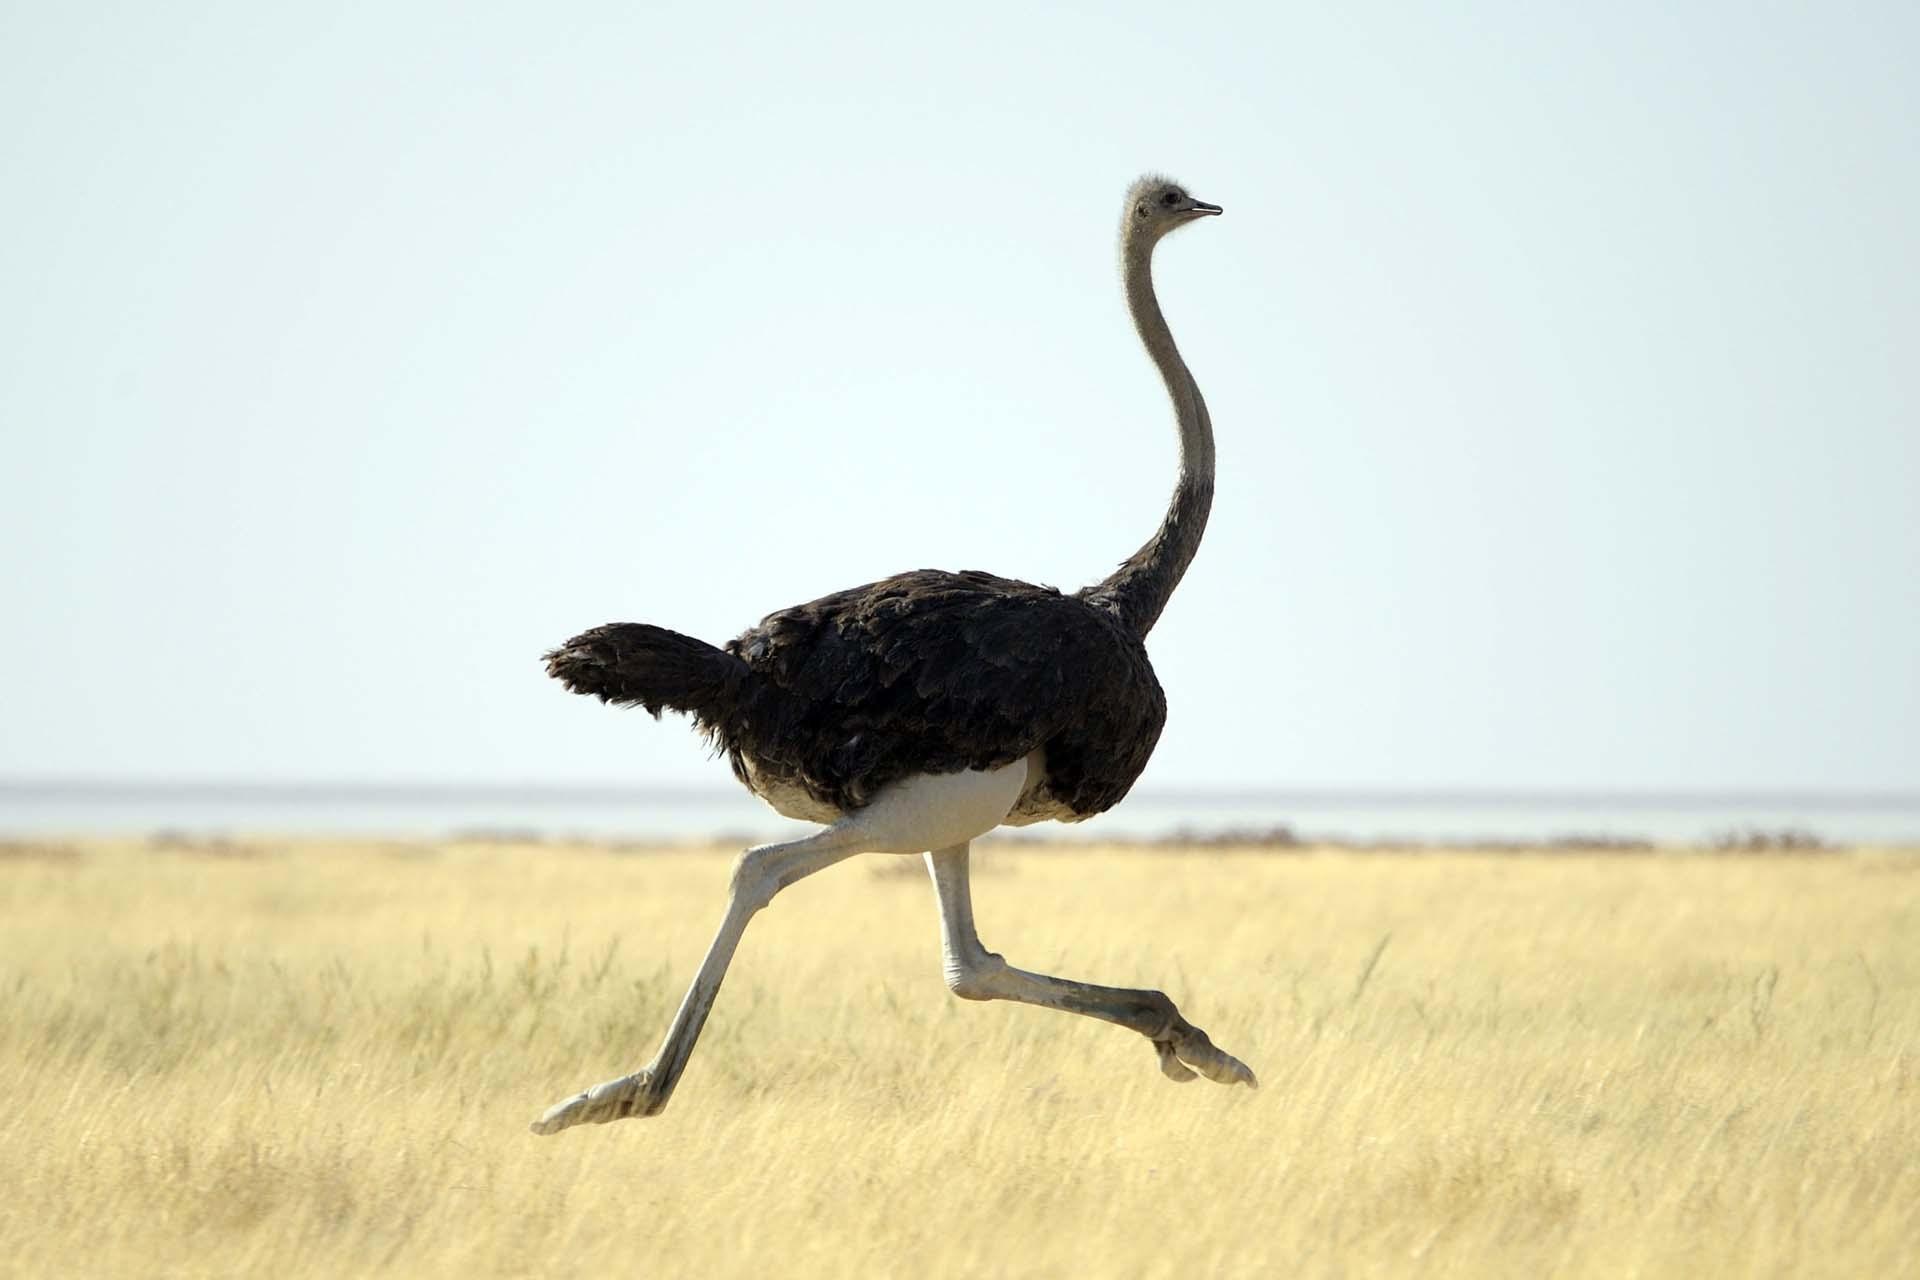 Ostrich wallpapers, Animal hq ostriches, Feathered giants, Wildlife photography, 1920x1280 HD Desktop